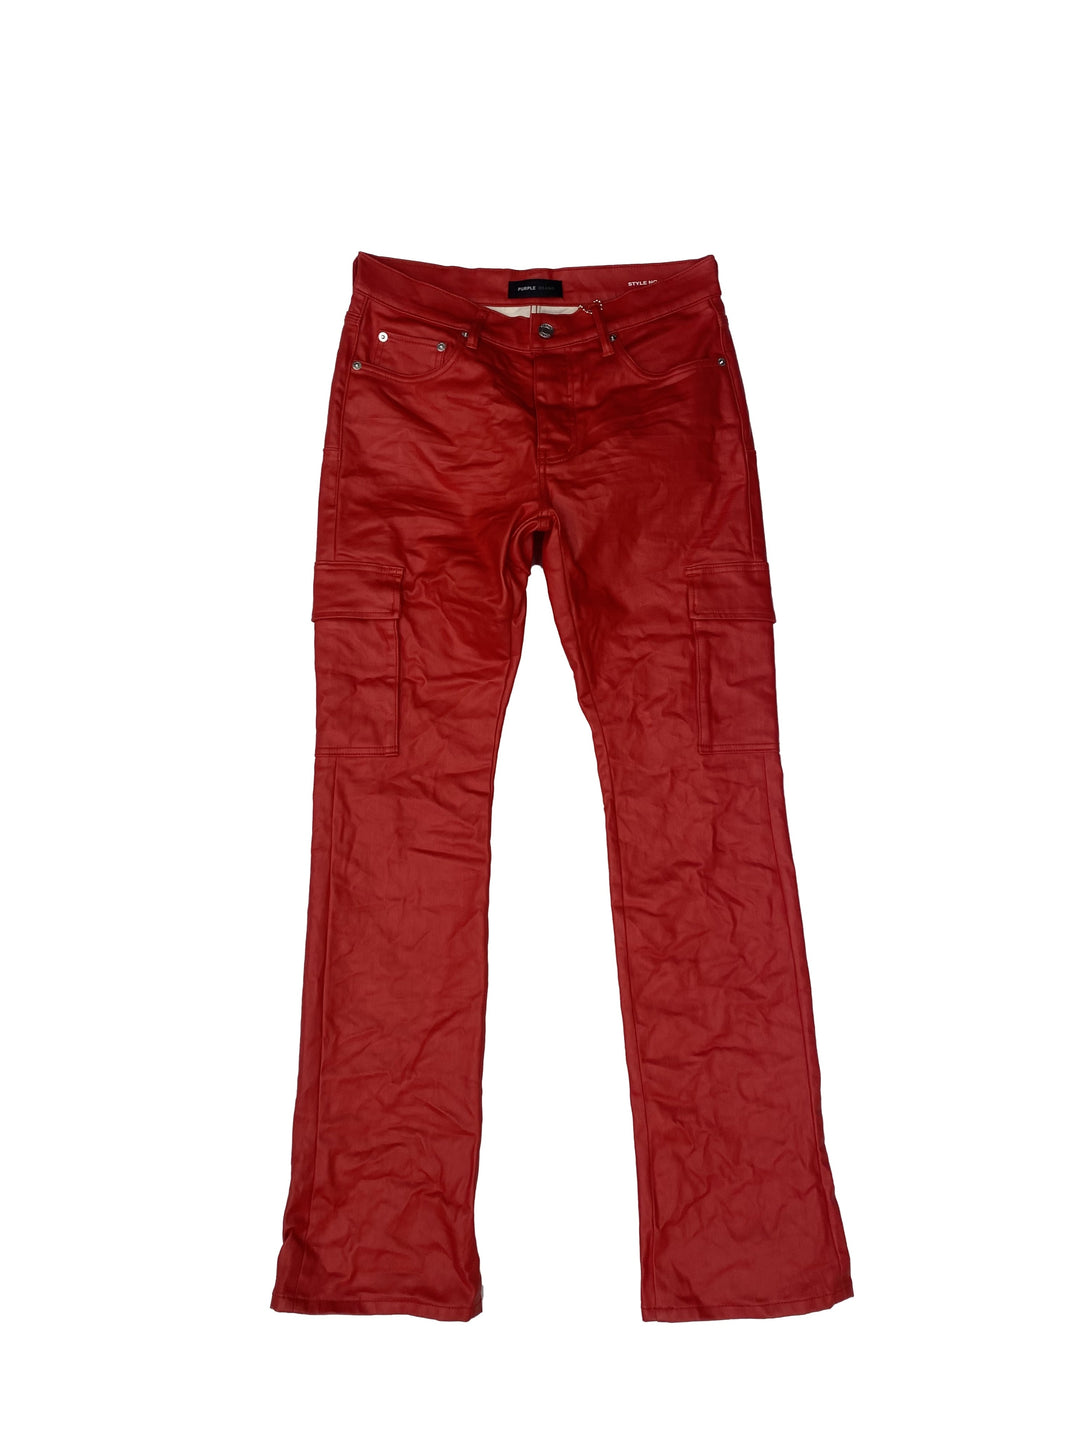 Purple Brand P004 Flare Jeans - Red Patent Film Cargo Flare